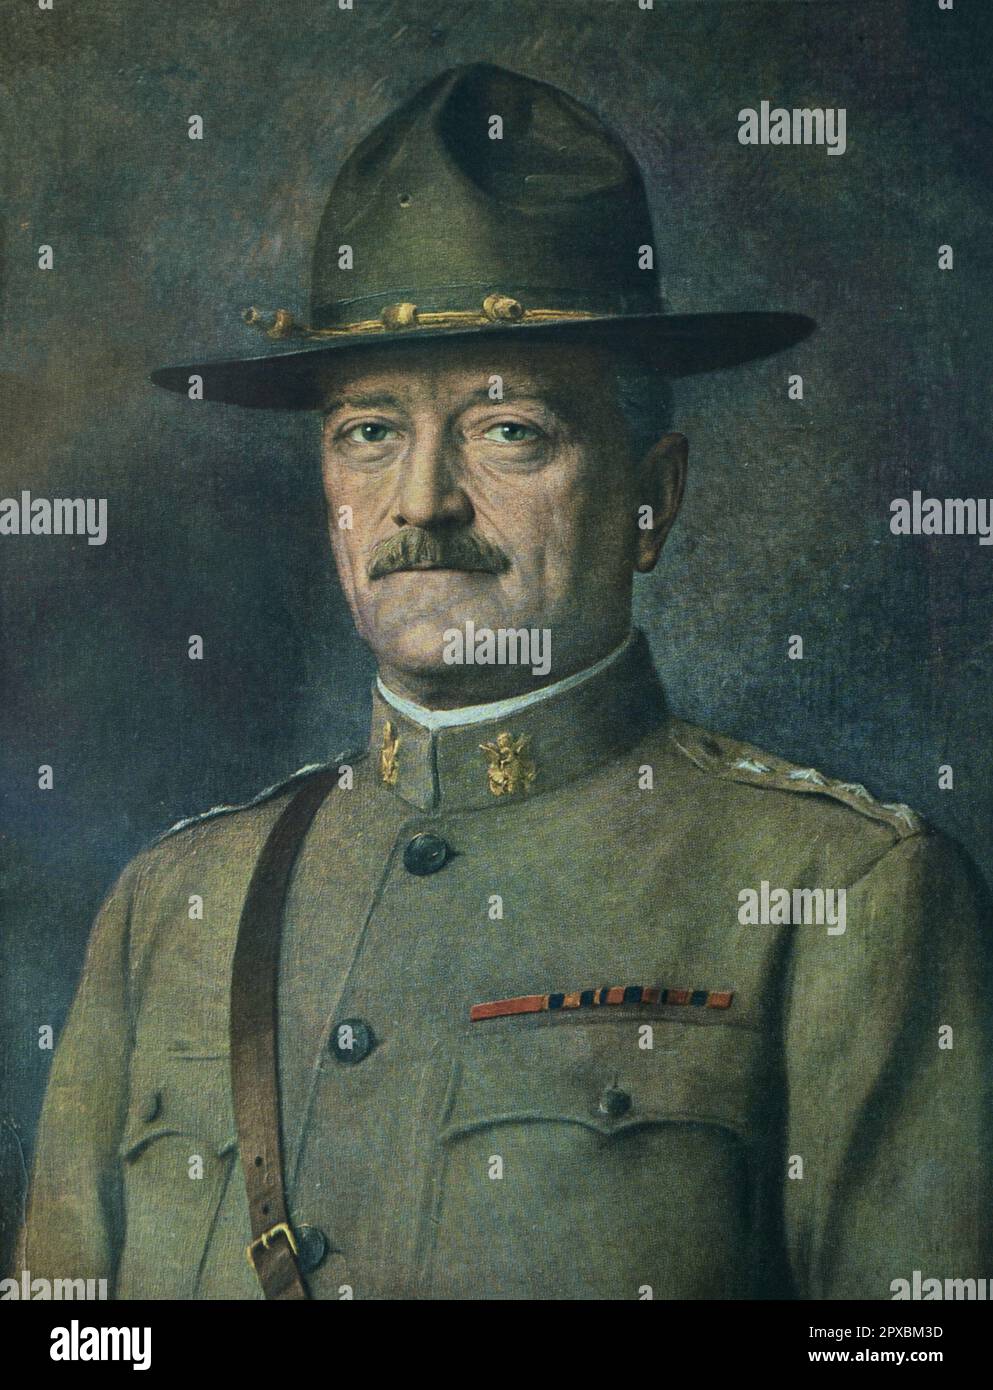 General Pershing.  General of the Armies John Joseph Pershing GCB (1860–1948), nicknamed 'Black Jack', was a senior United States Army officer. He served most famously as the commander of the American Expeditionary Forces (AEF) on the Western Front during World War I, from 1917 to 1918. In addition to leading the AEF to victory in World War I, Pershing notably served as a mentor to many in the generation of generals who led the United States Army during World War II, including George C. Marshall, Dwight D. Eisenhower, Omar Bradley, Lesley J. McNair, George S. Patton and Douglas MacArthur. Stock Photo